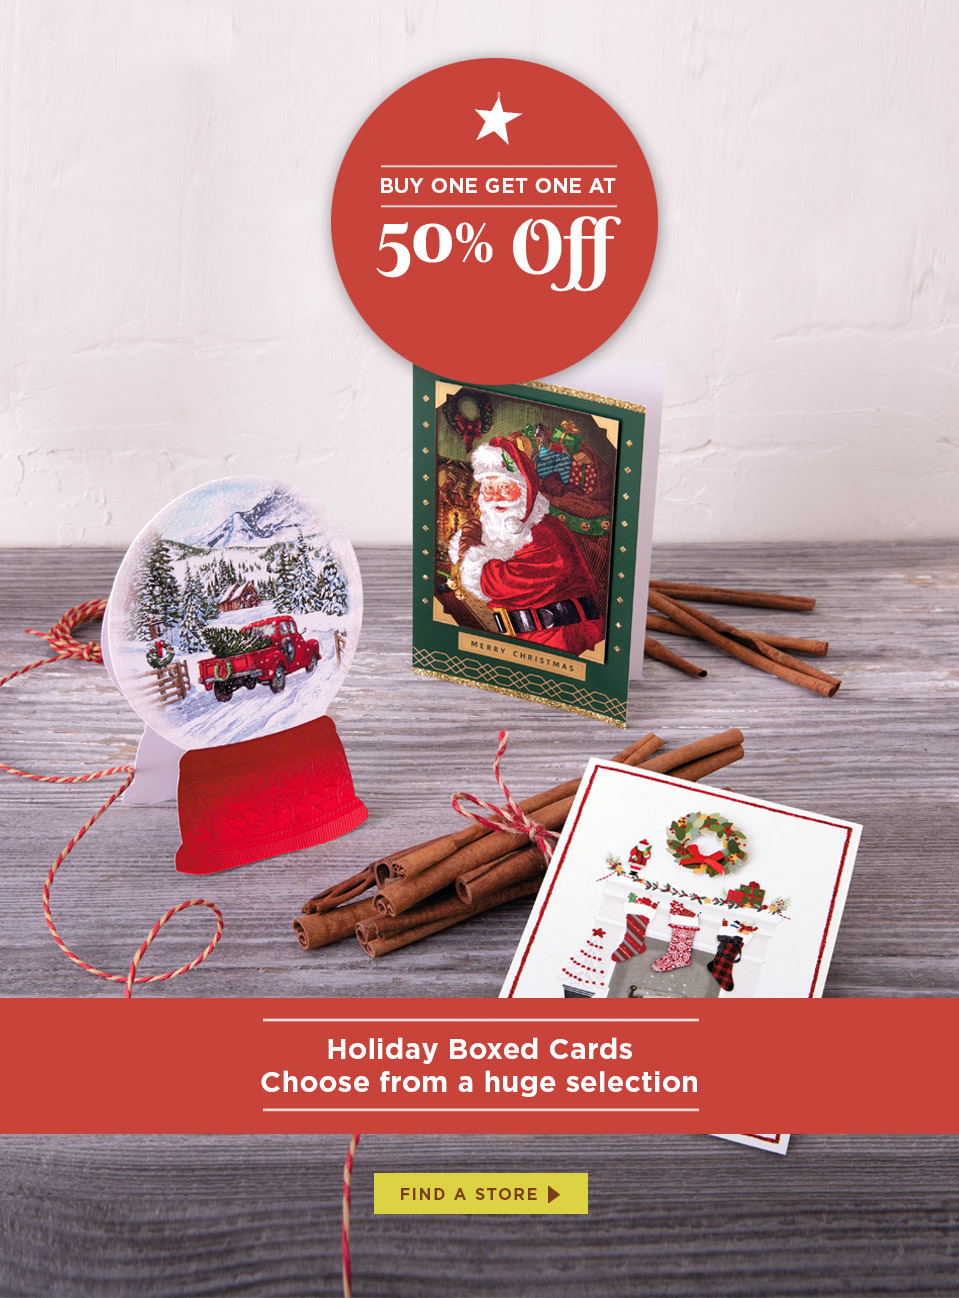 Buy One Get One at 50% OFF. Holiday Boxed Cards